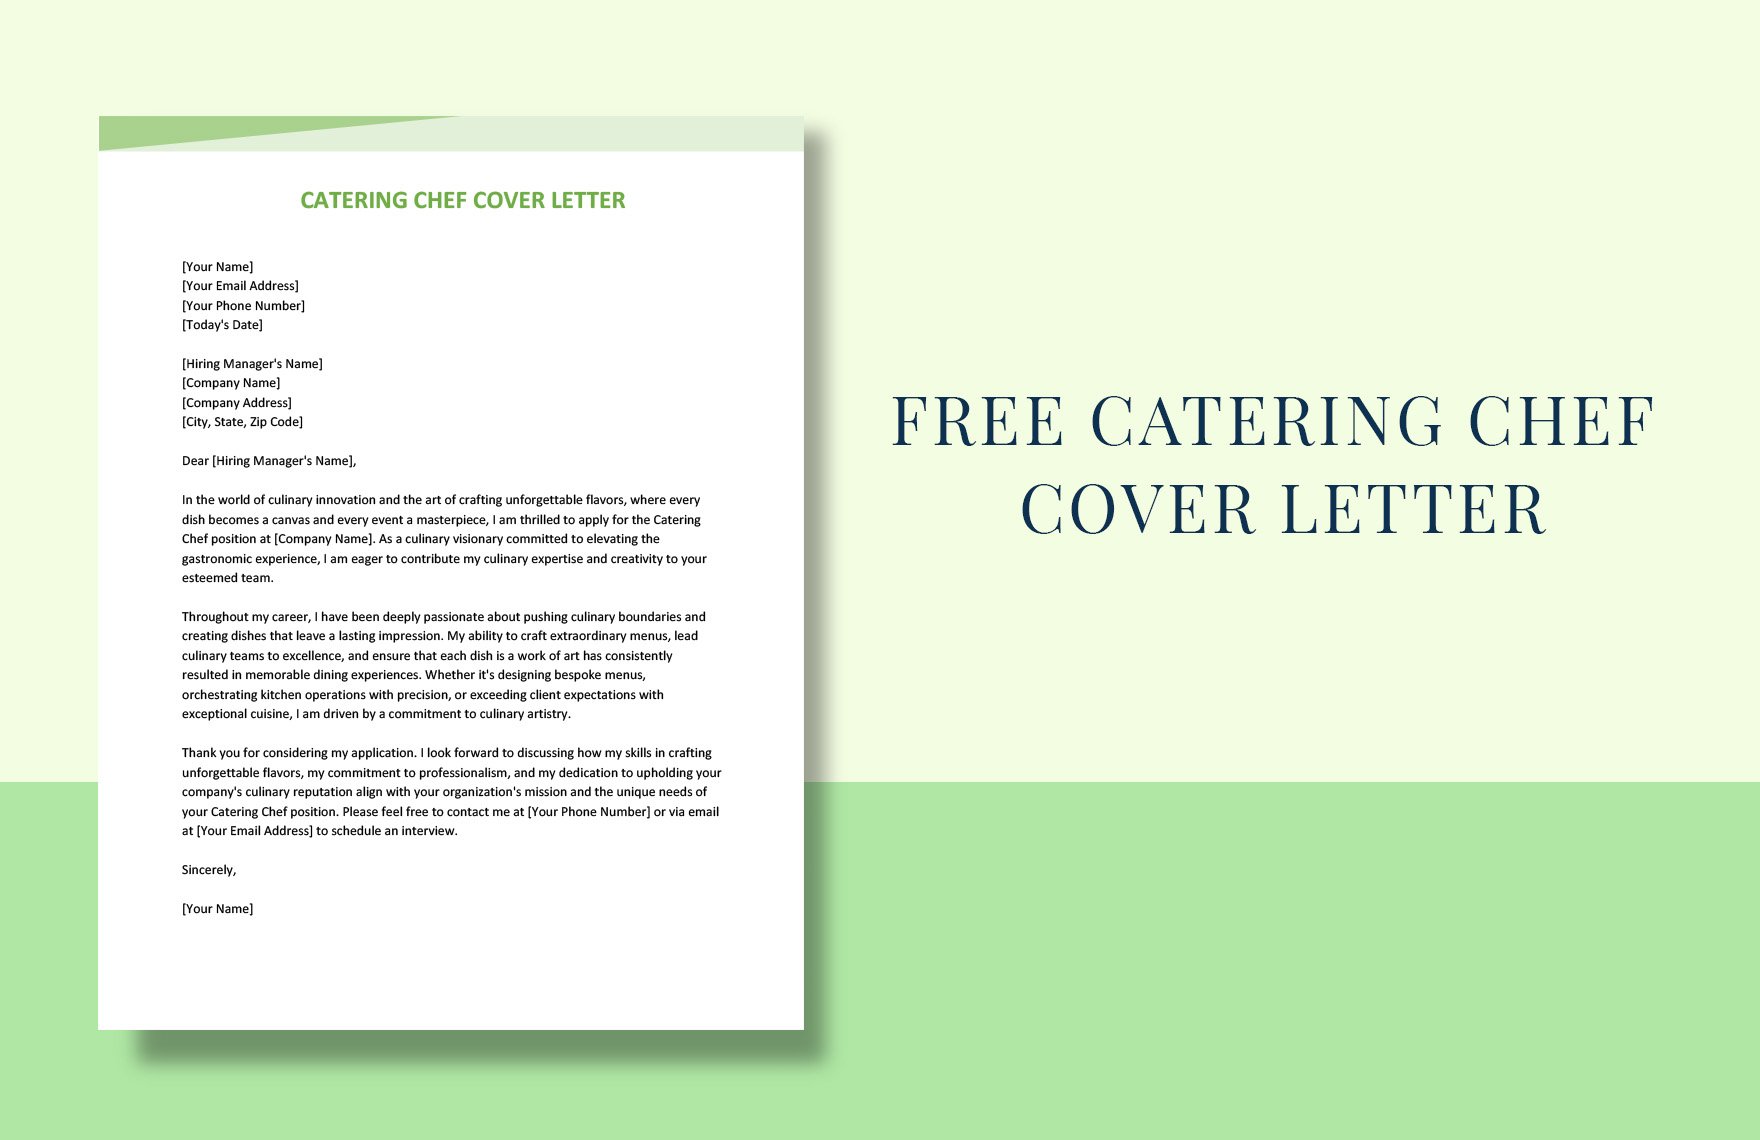 Catering Chef Cover Letter